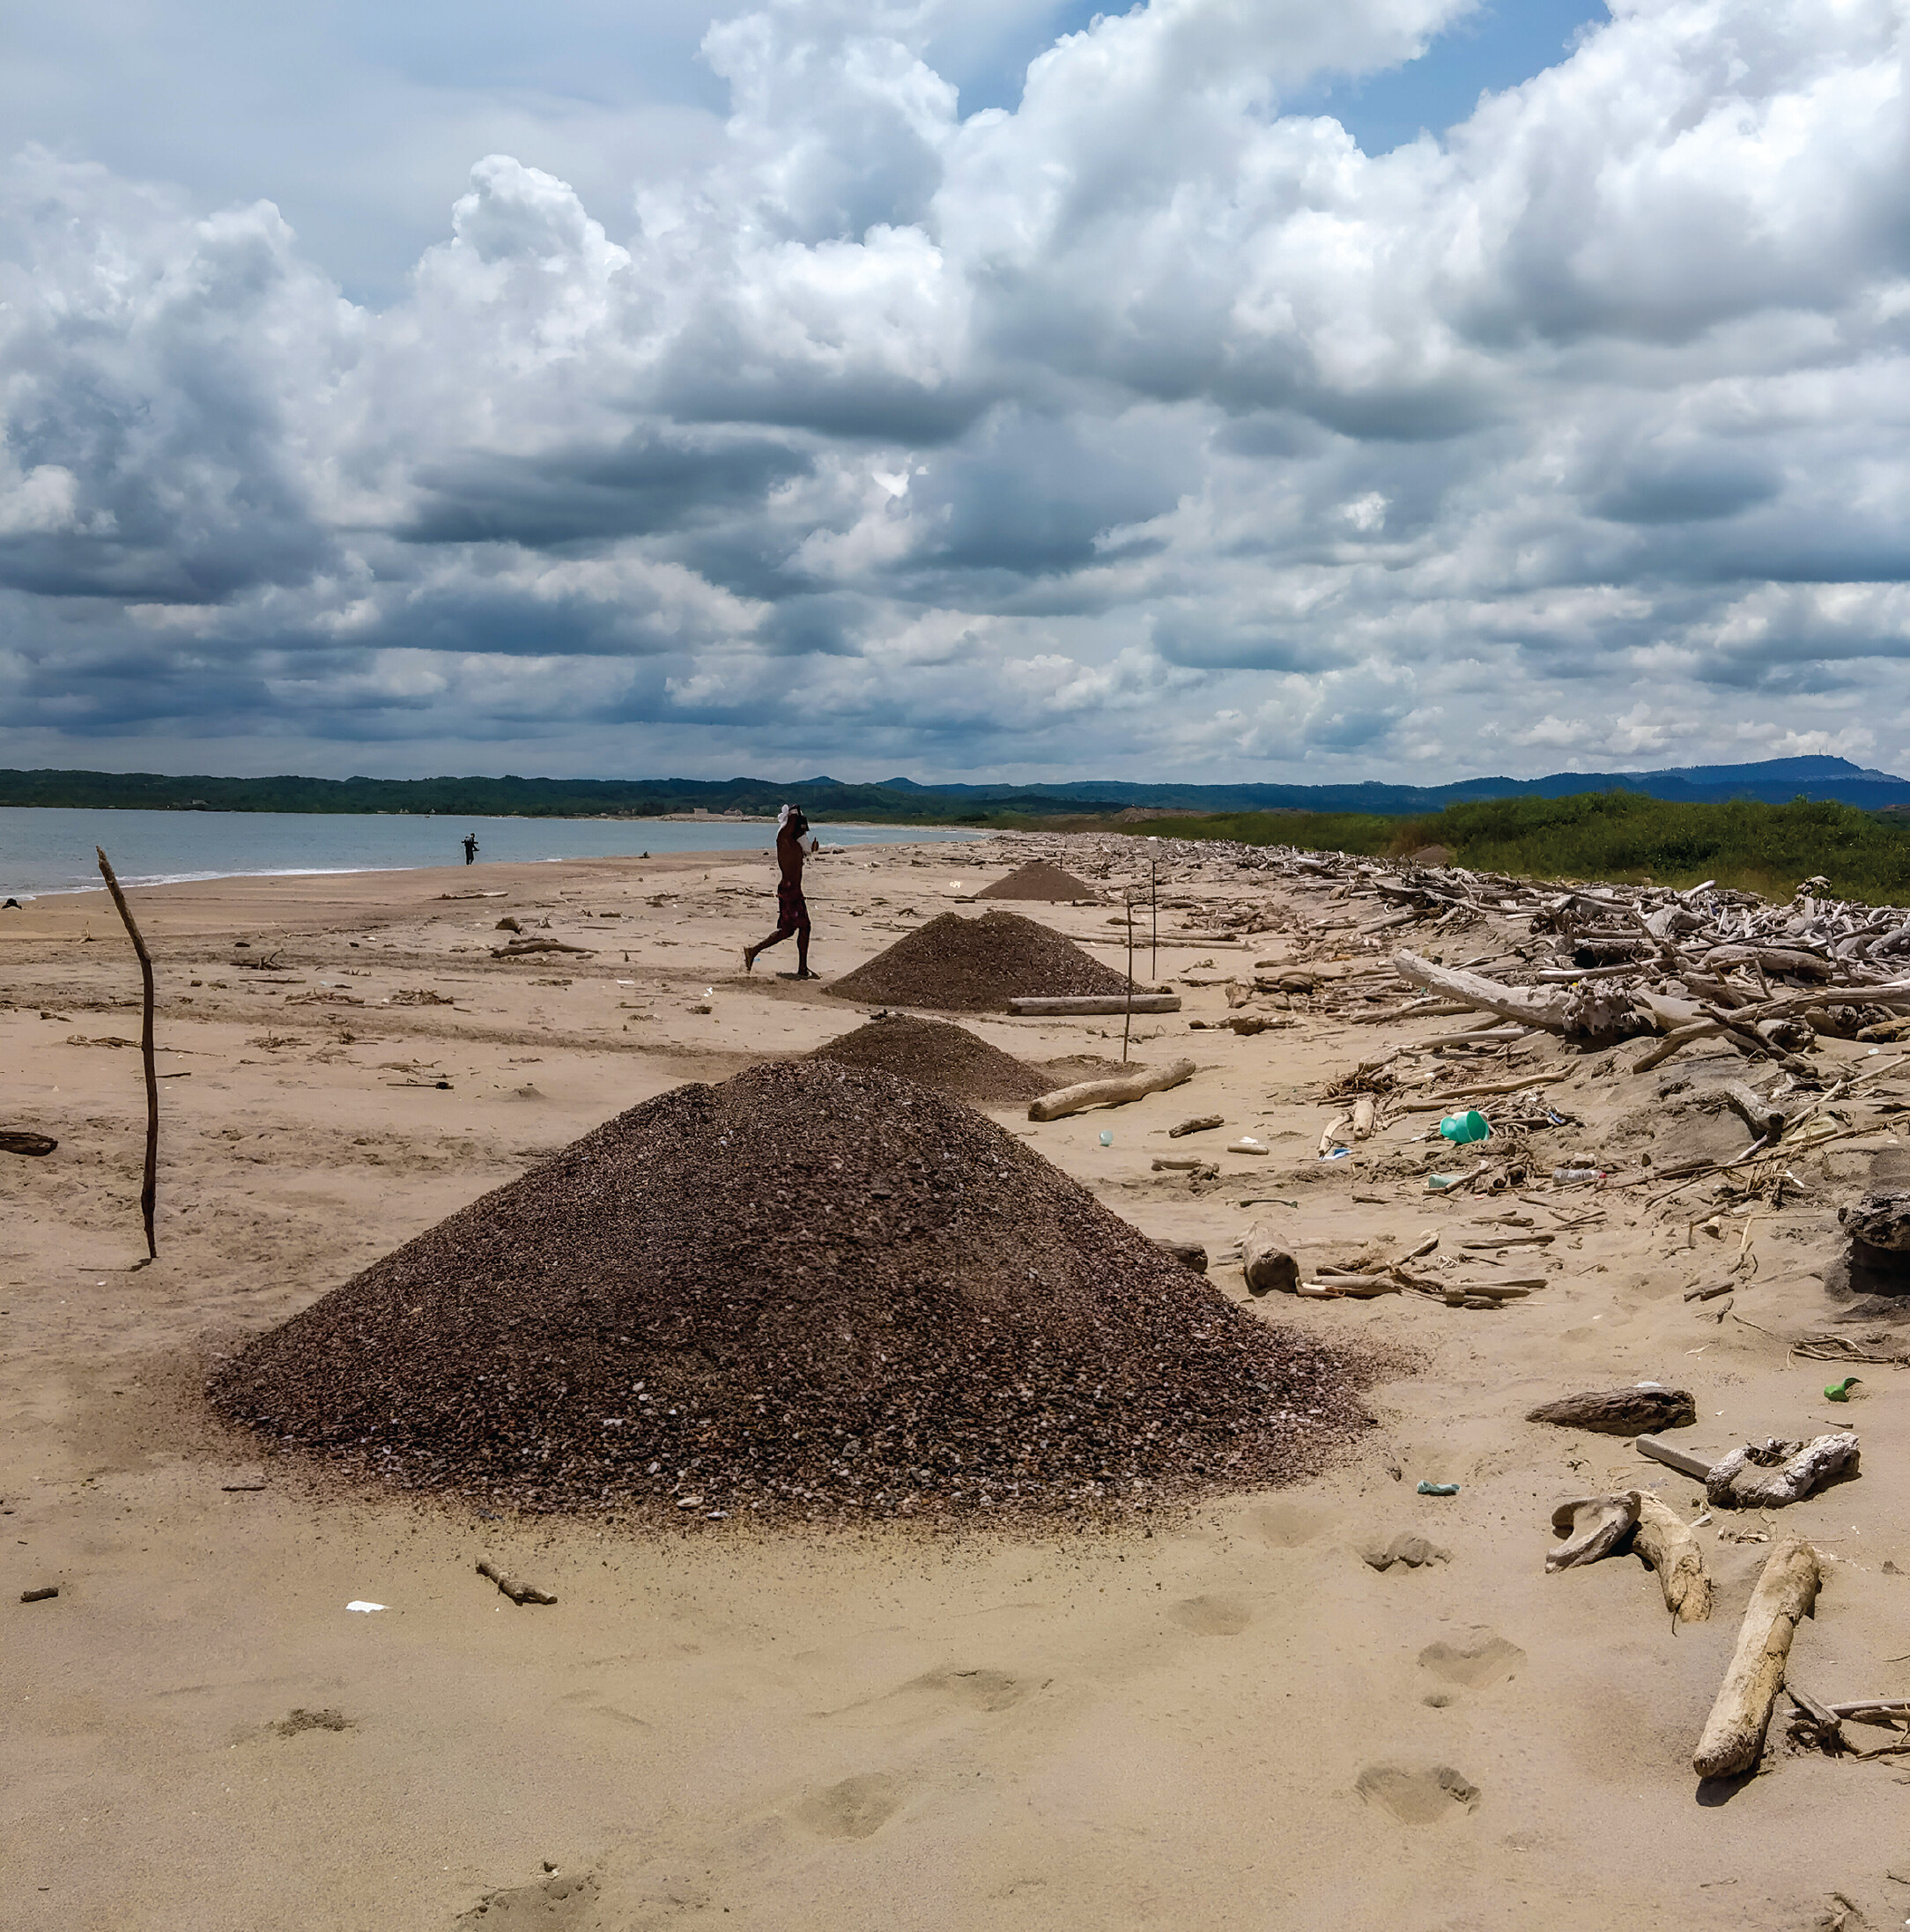 Mining is removing sand from coastal sites, such as this one in Colombia, faster than natural processes can replenish it (photo © Nelson Rangel-Buitrago)